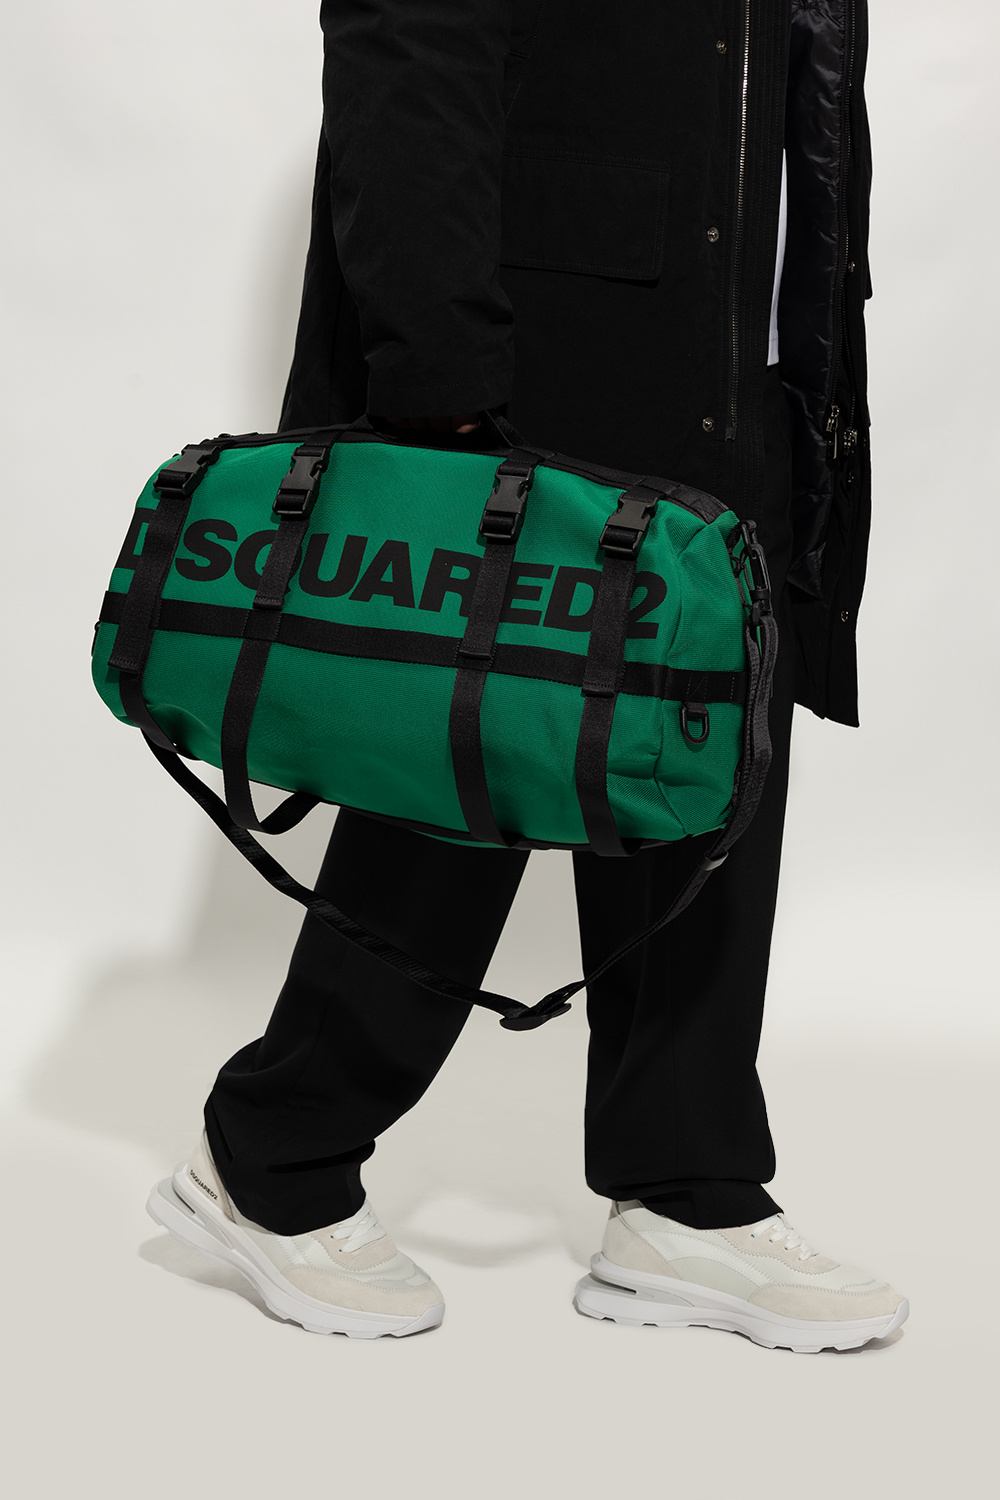 Dsquared2 Holdall leather bag